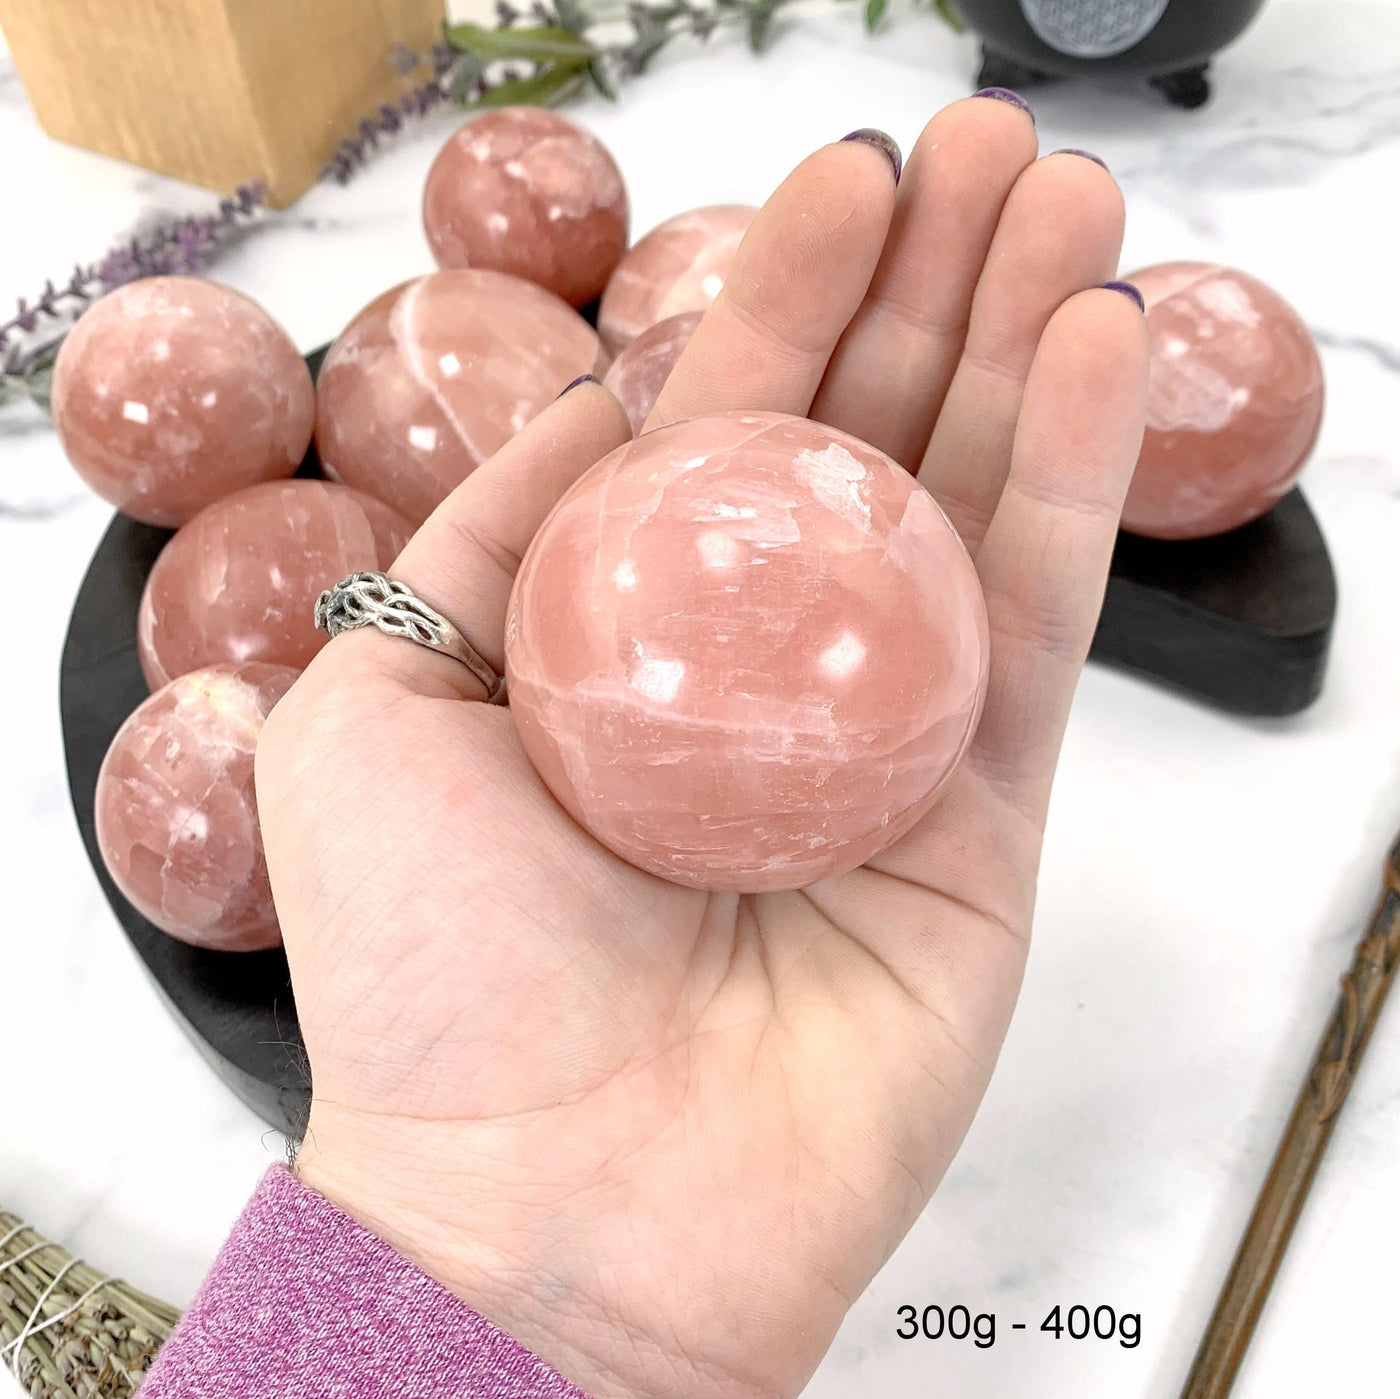 300gram - 400gram rose calcite sphere in hand with marble background